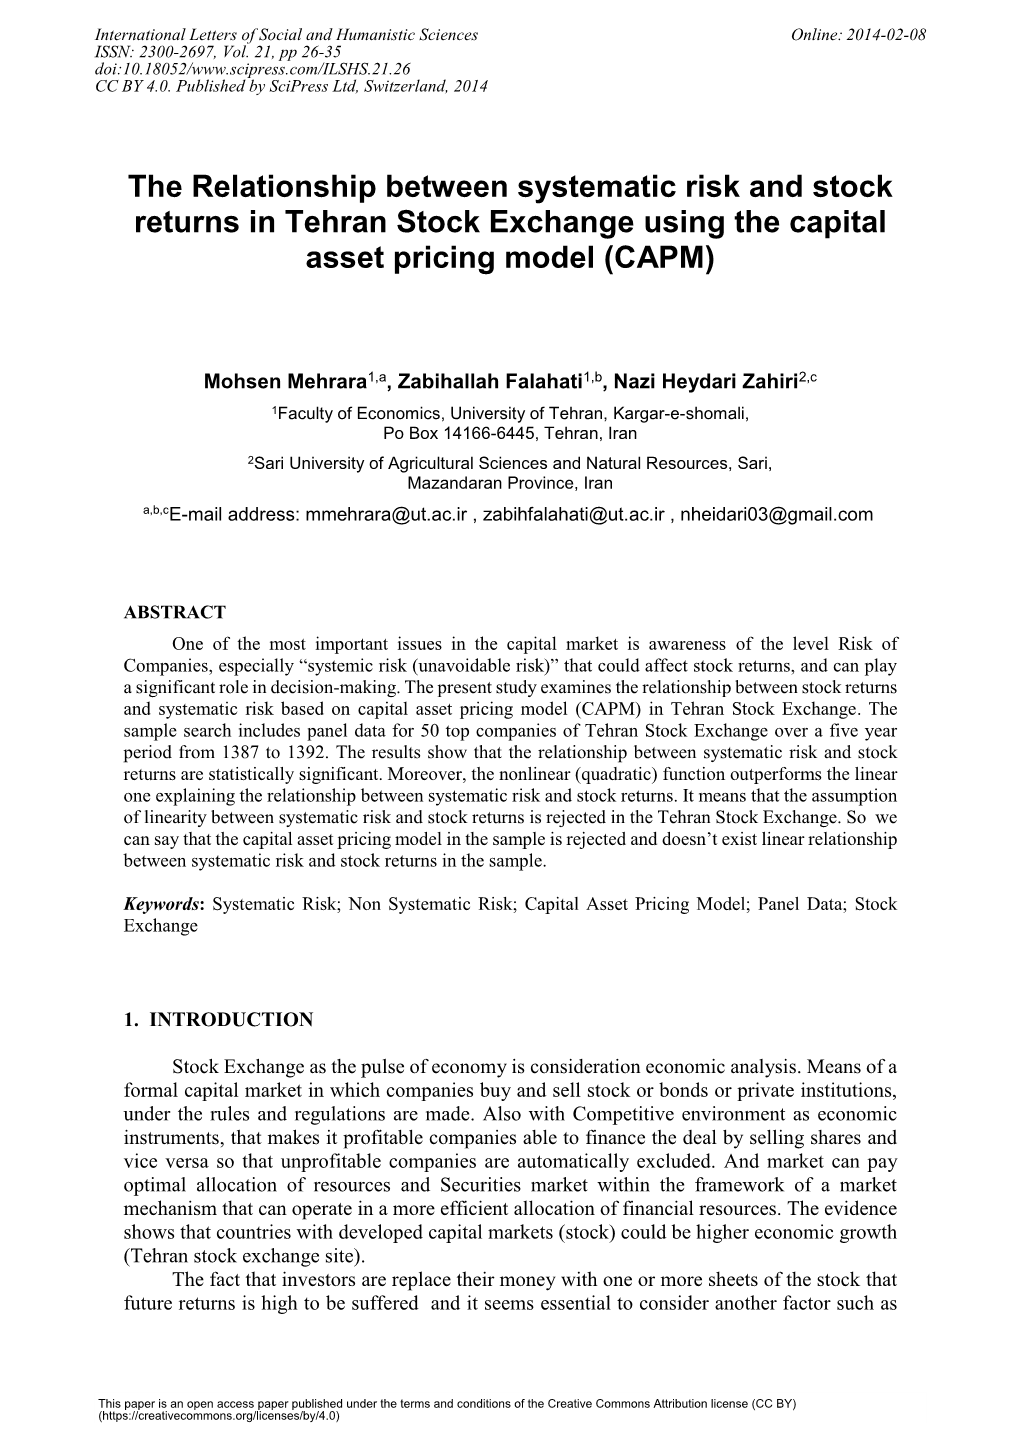 The Relationship Between Systematic Risk and Stock Returns in Tehran Stock Exchange Using the Capital Asset Pricing Model (CAPM)